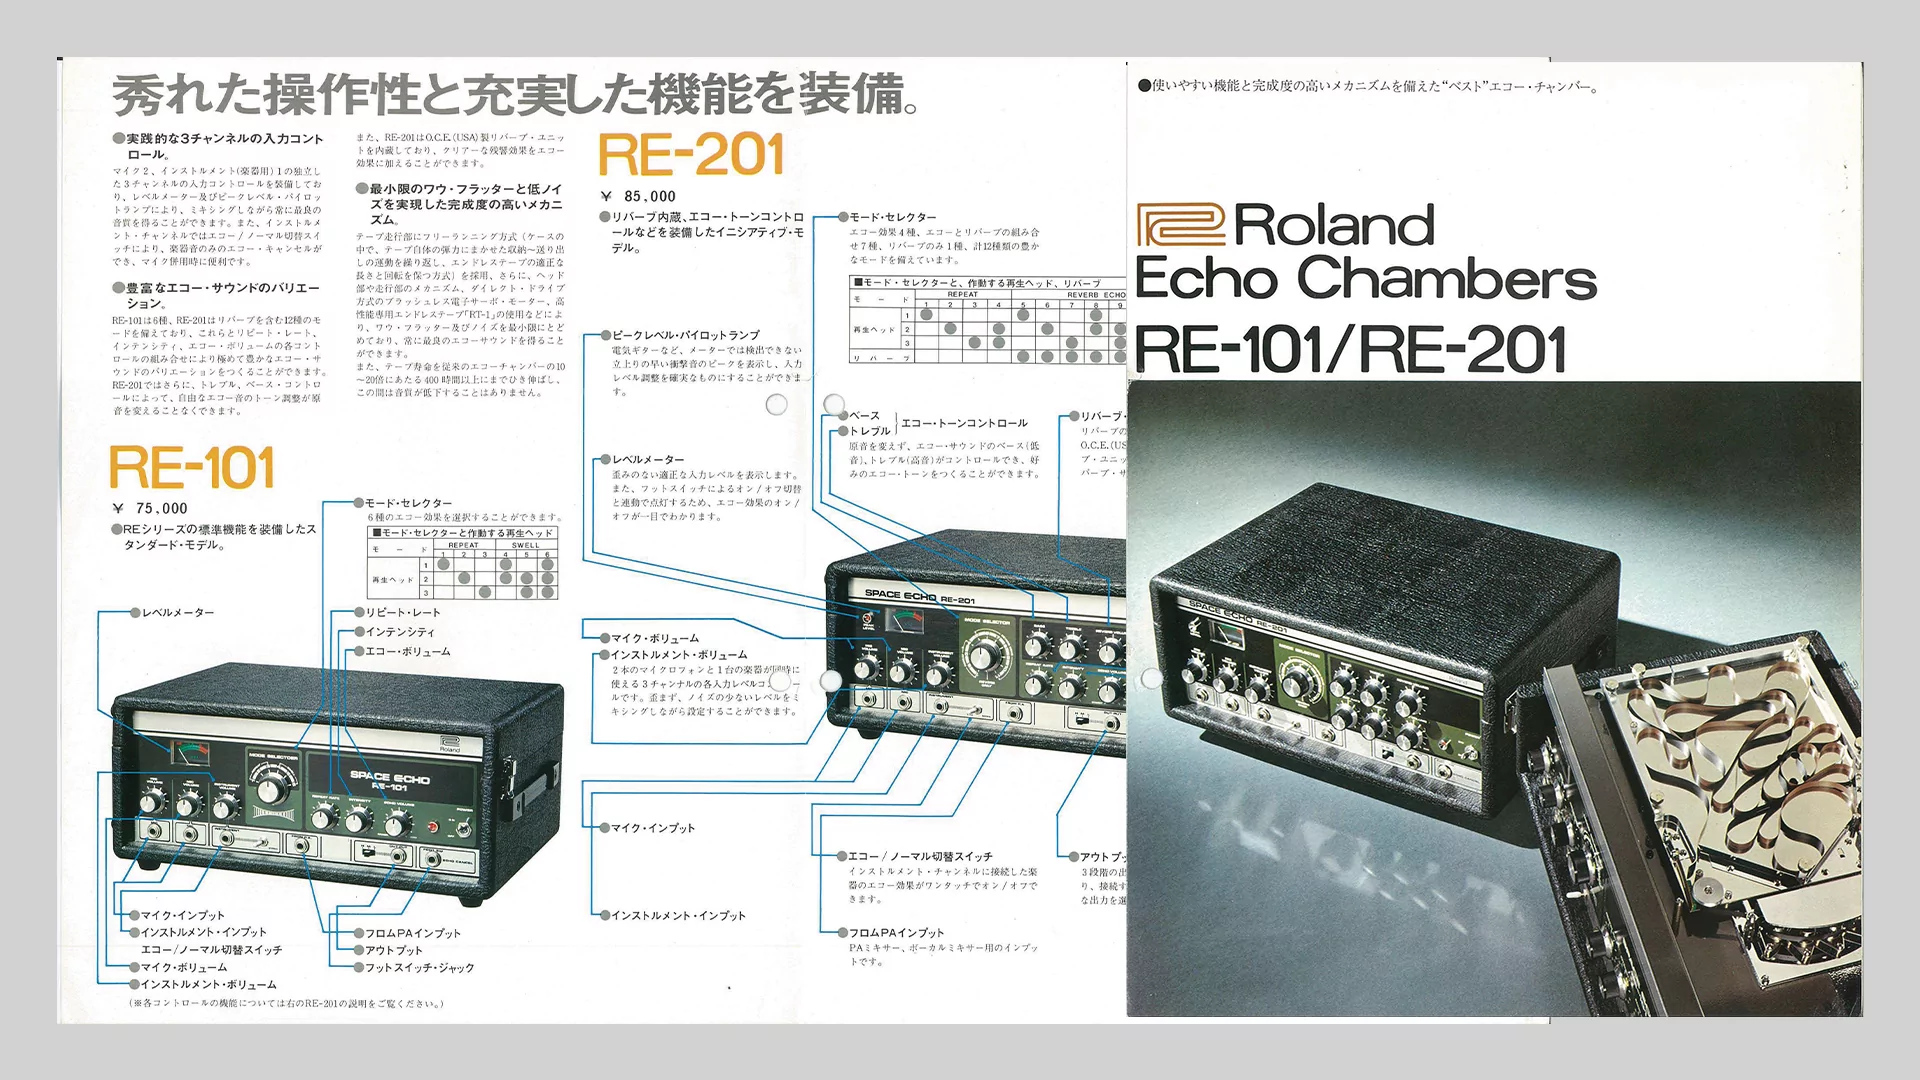 An original advert for Roland's Echo Chambers RE-101 and RE-201